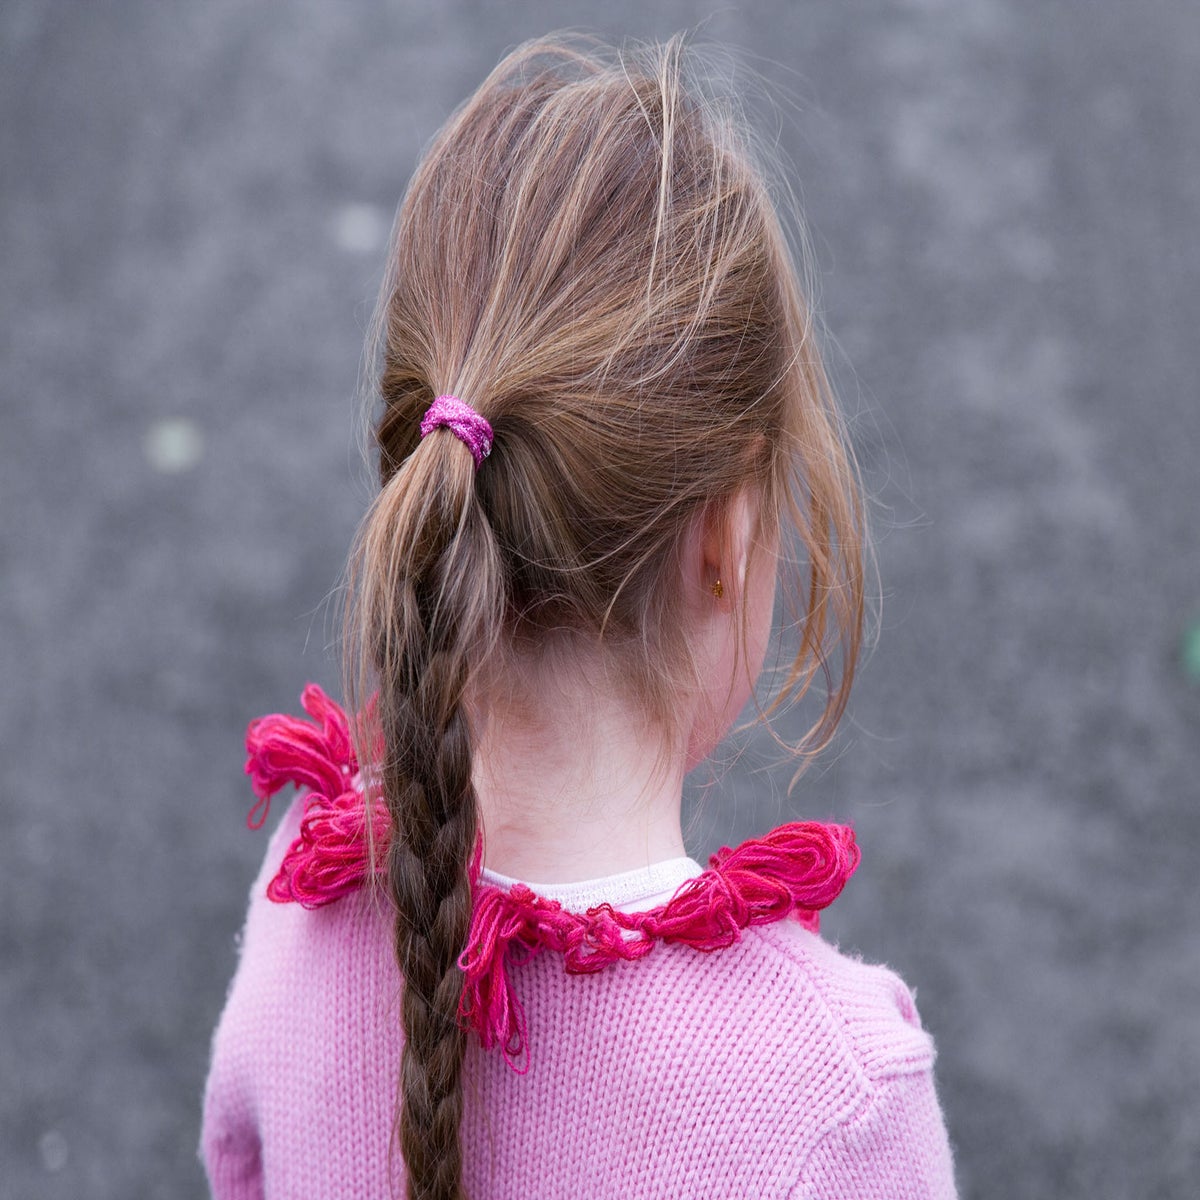 Precocious puberty: The condition that causes children to start puberty as  young as two years old | The Independent | The Independent